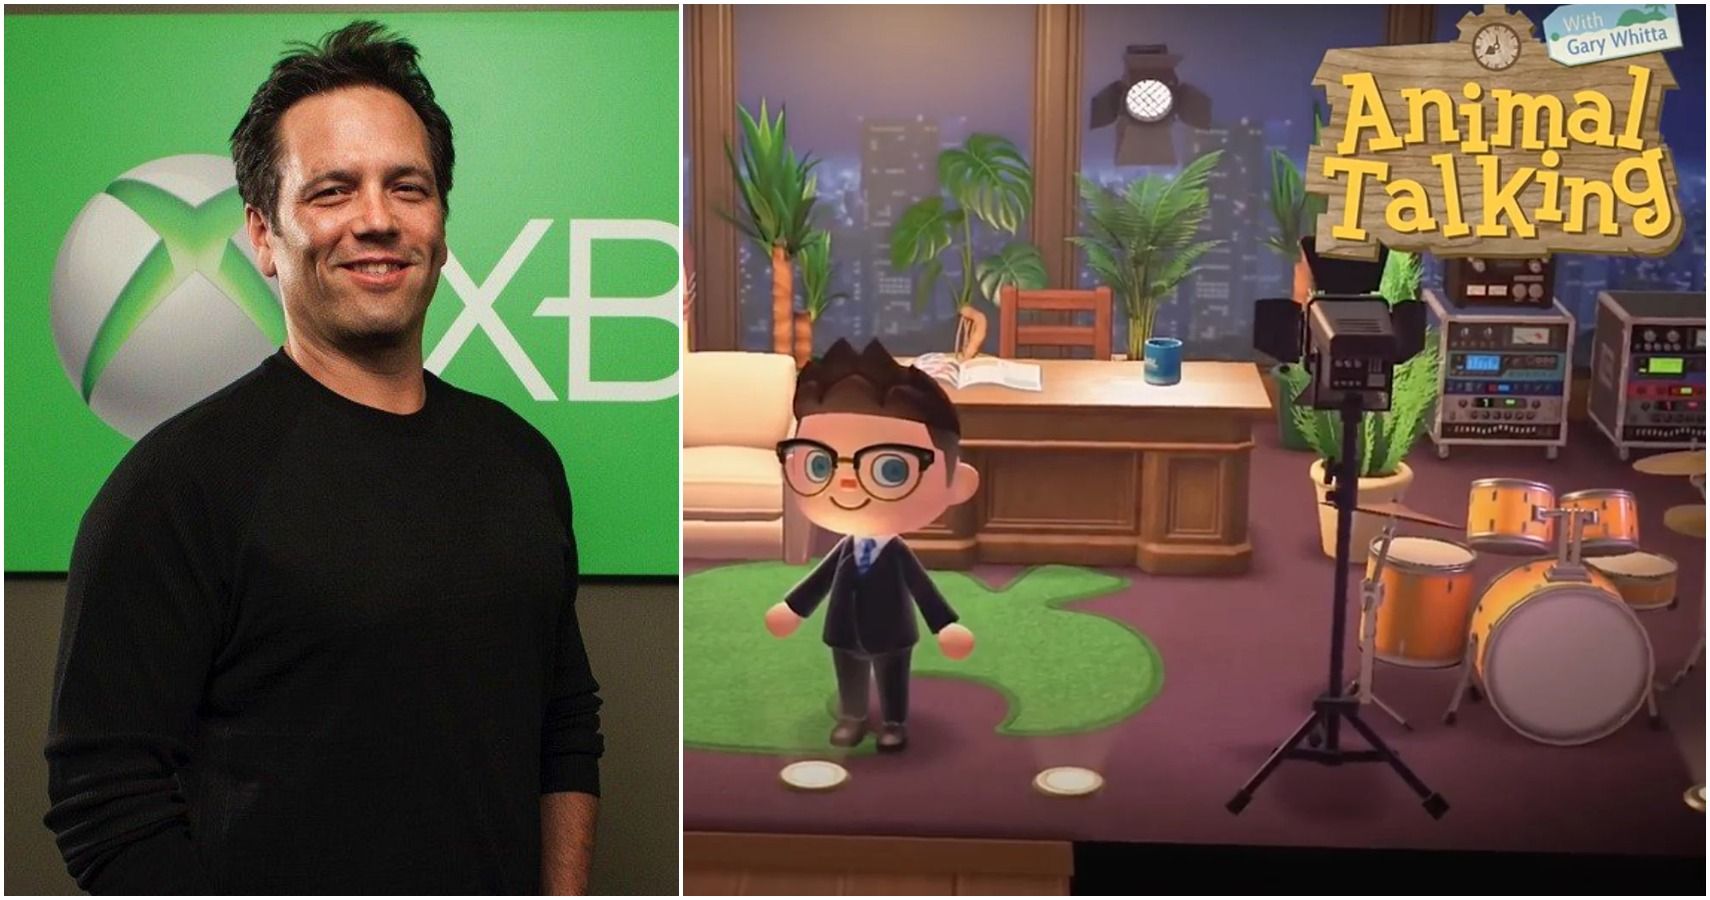 The Head Of Xbox Is Going To Be Interviewed In Animal Crossing